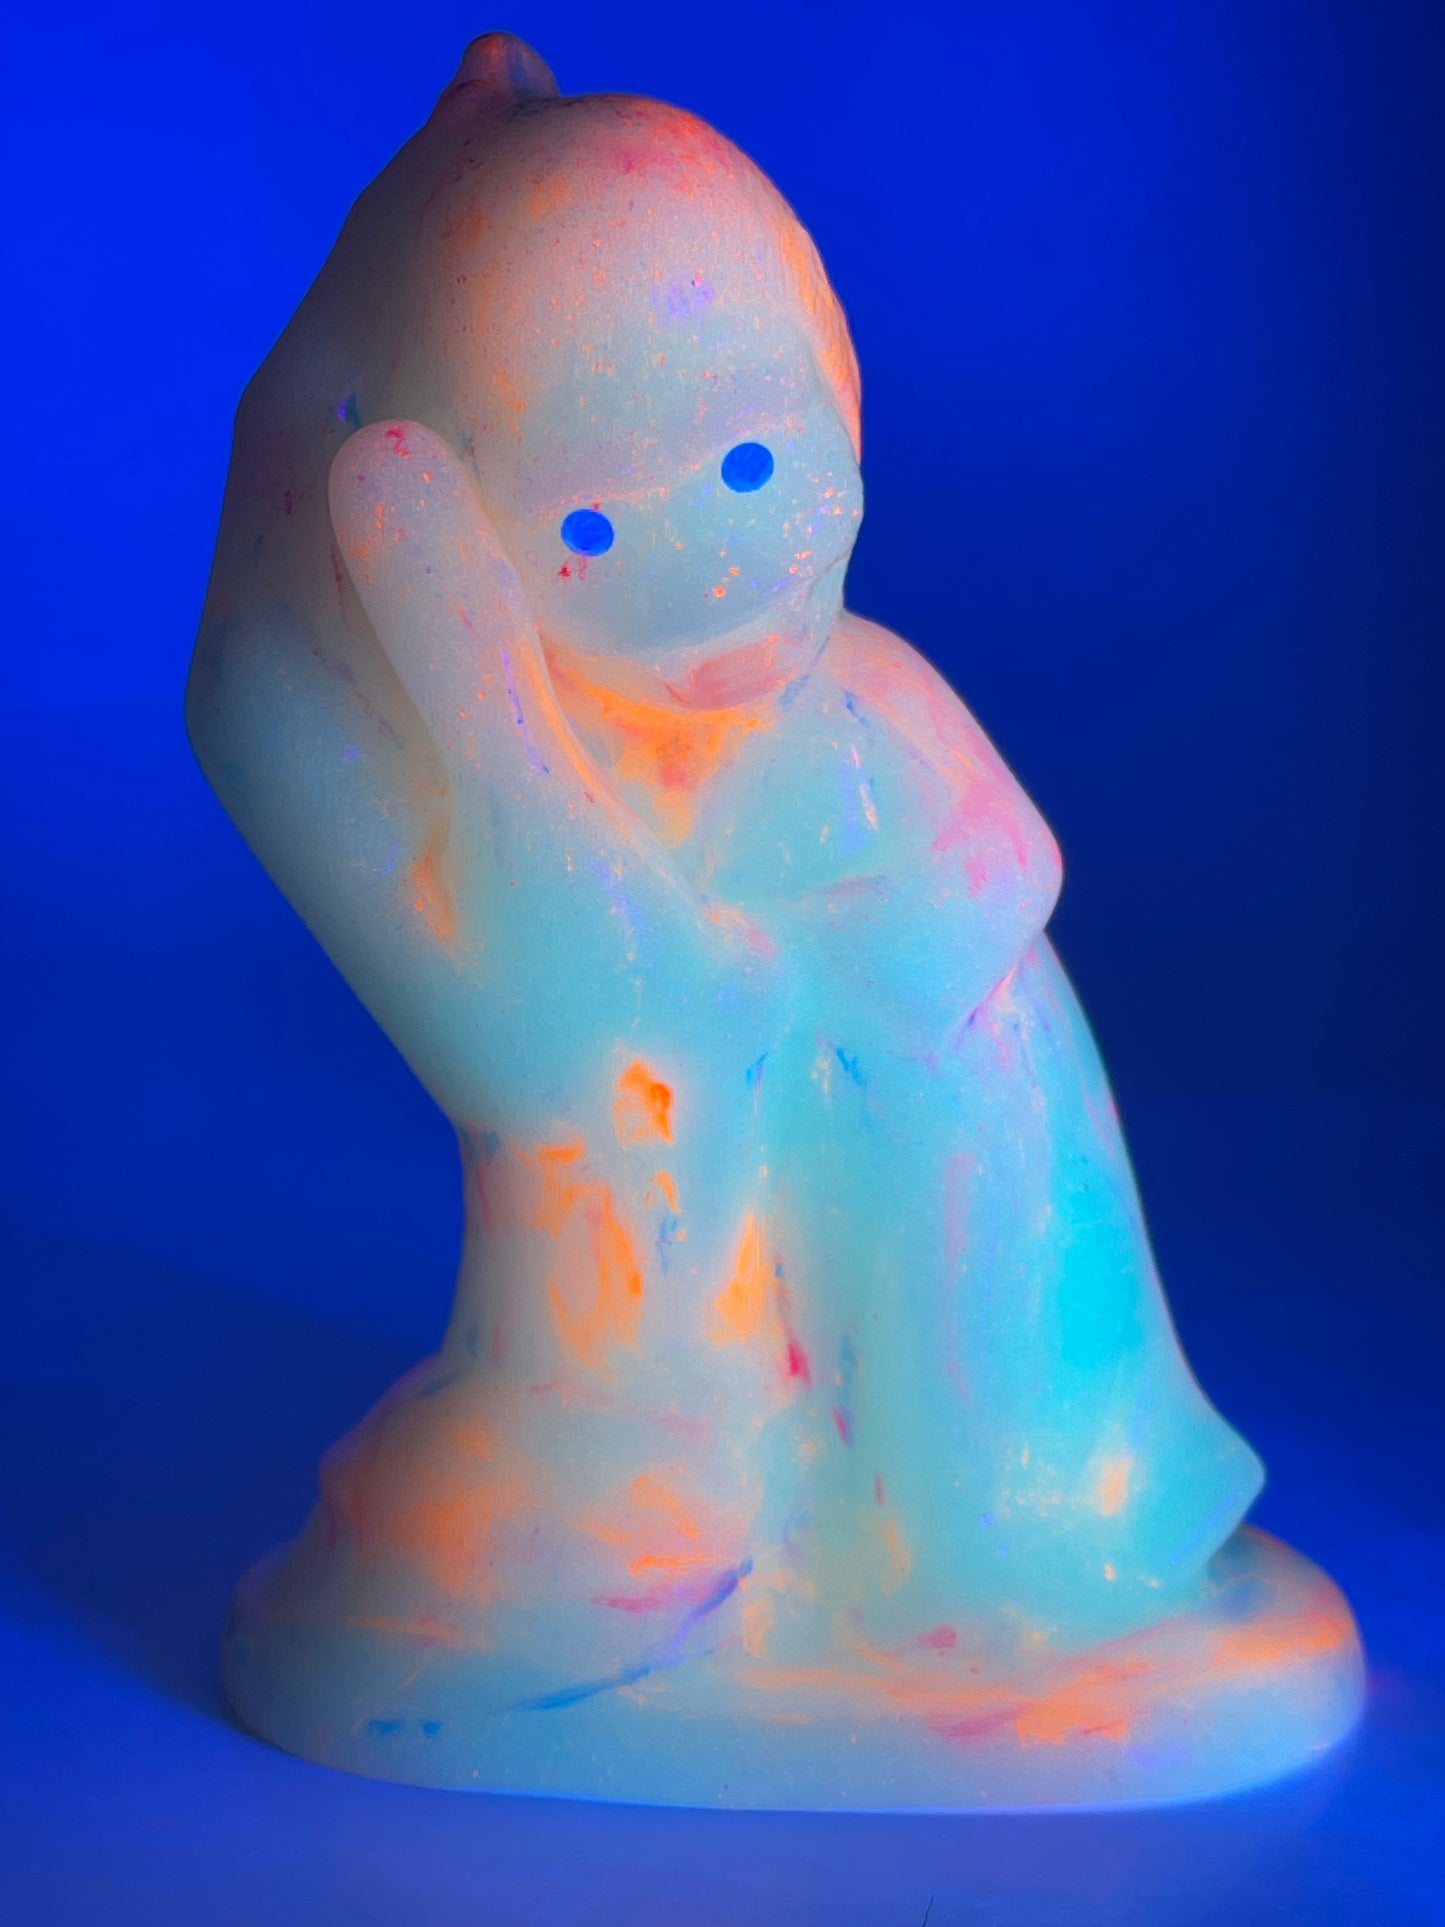 Ape in the Palm of the Lord: Glow in the Dark Baby Go